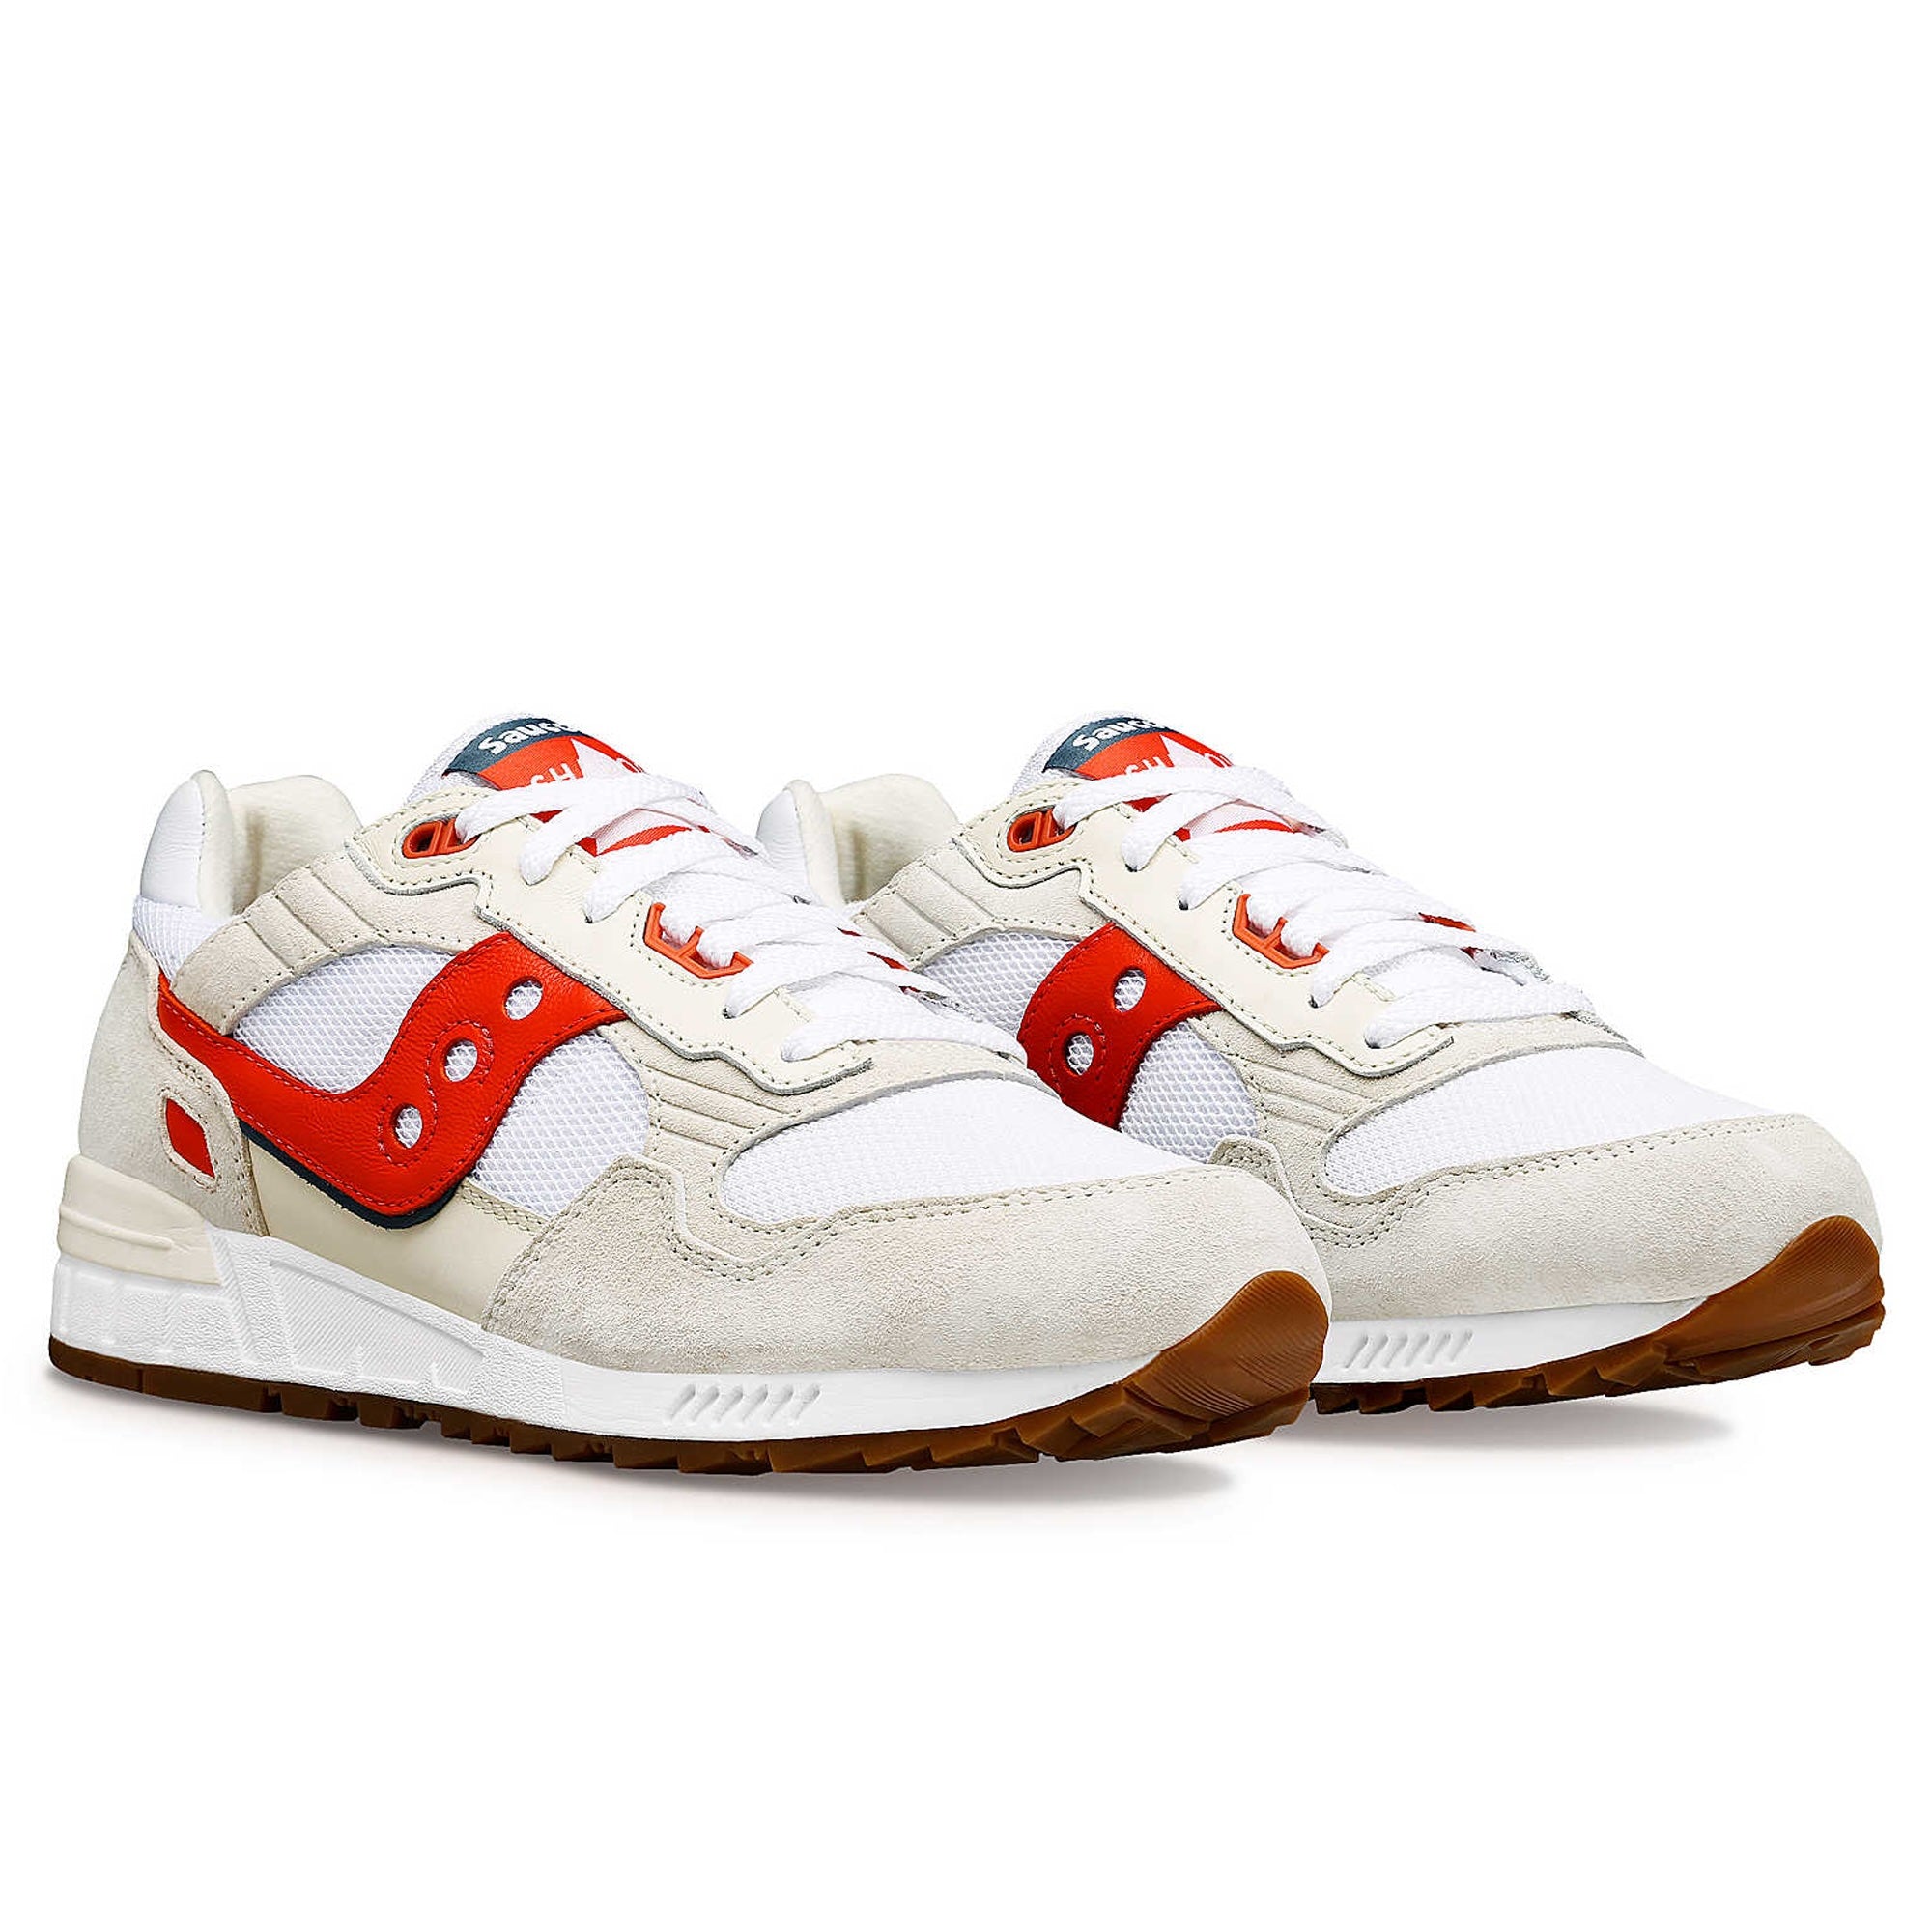 Saucony Shadow 5000 Premium "Ivy Prep Pack" Trainers - White/Red